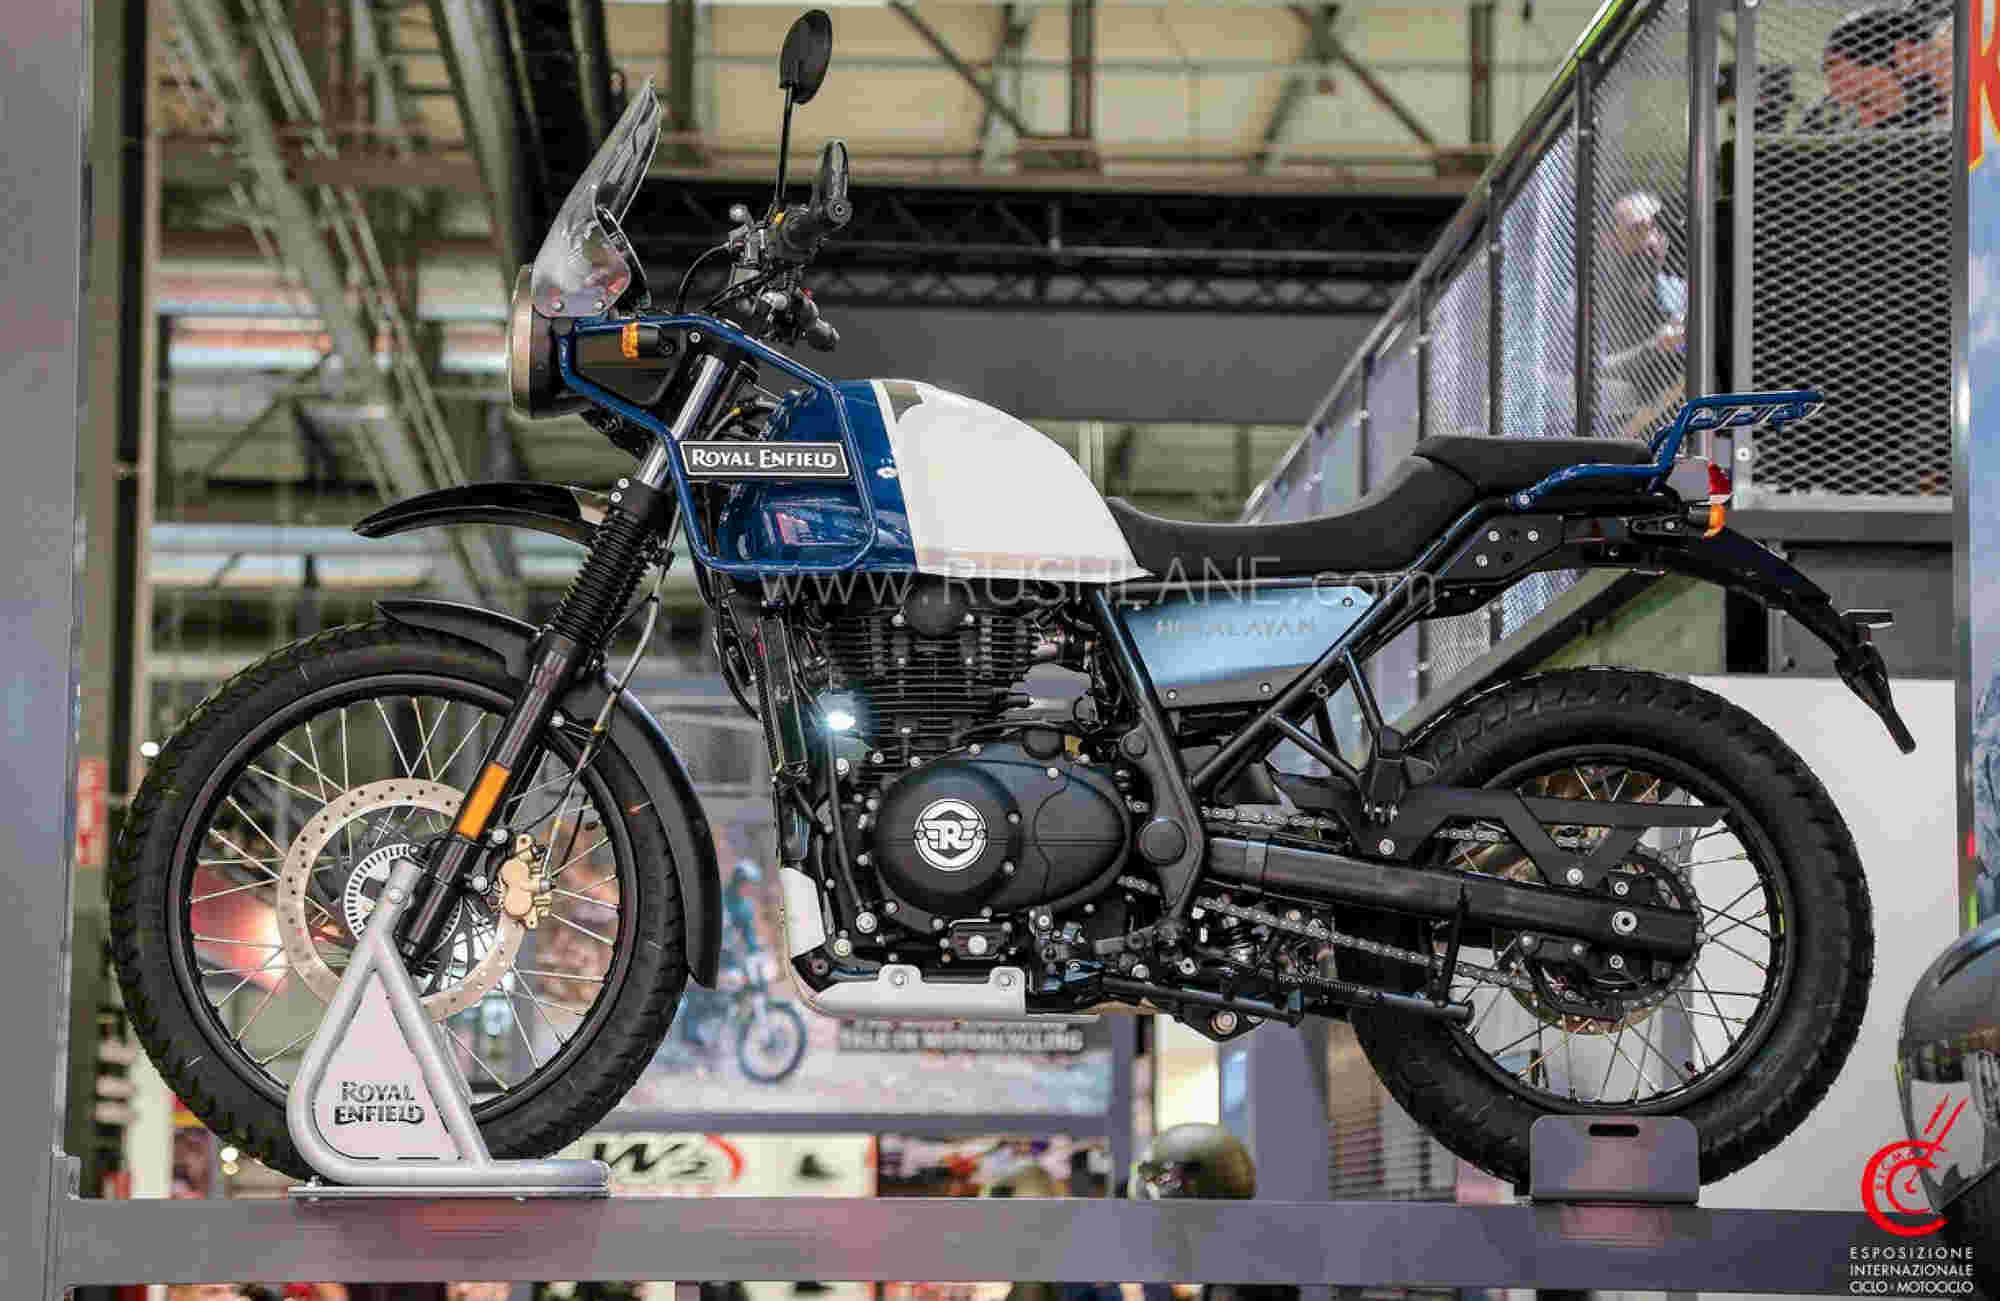 EICMA 2019: THREE new colours for Royal Enfield’s Himalayan. Red, Blue and Grey versions of the mini-adventure motorcycle coming for 2020?